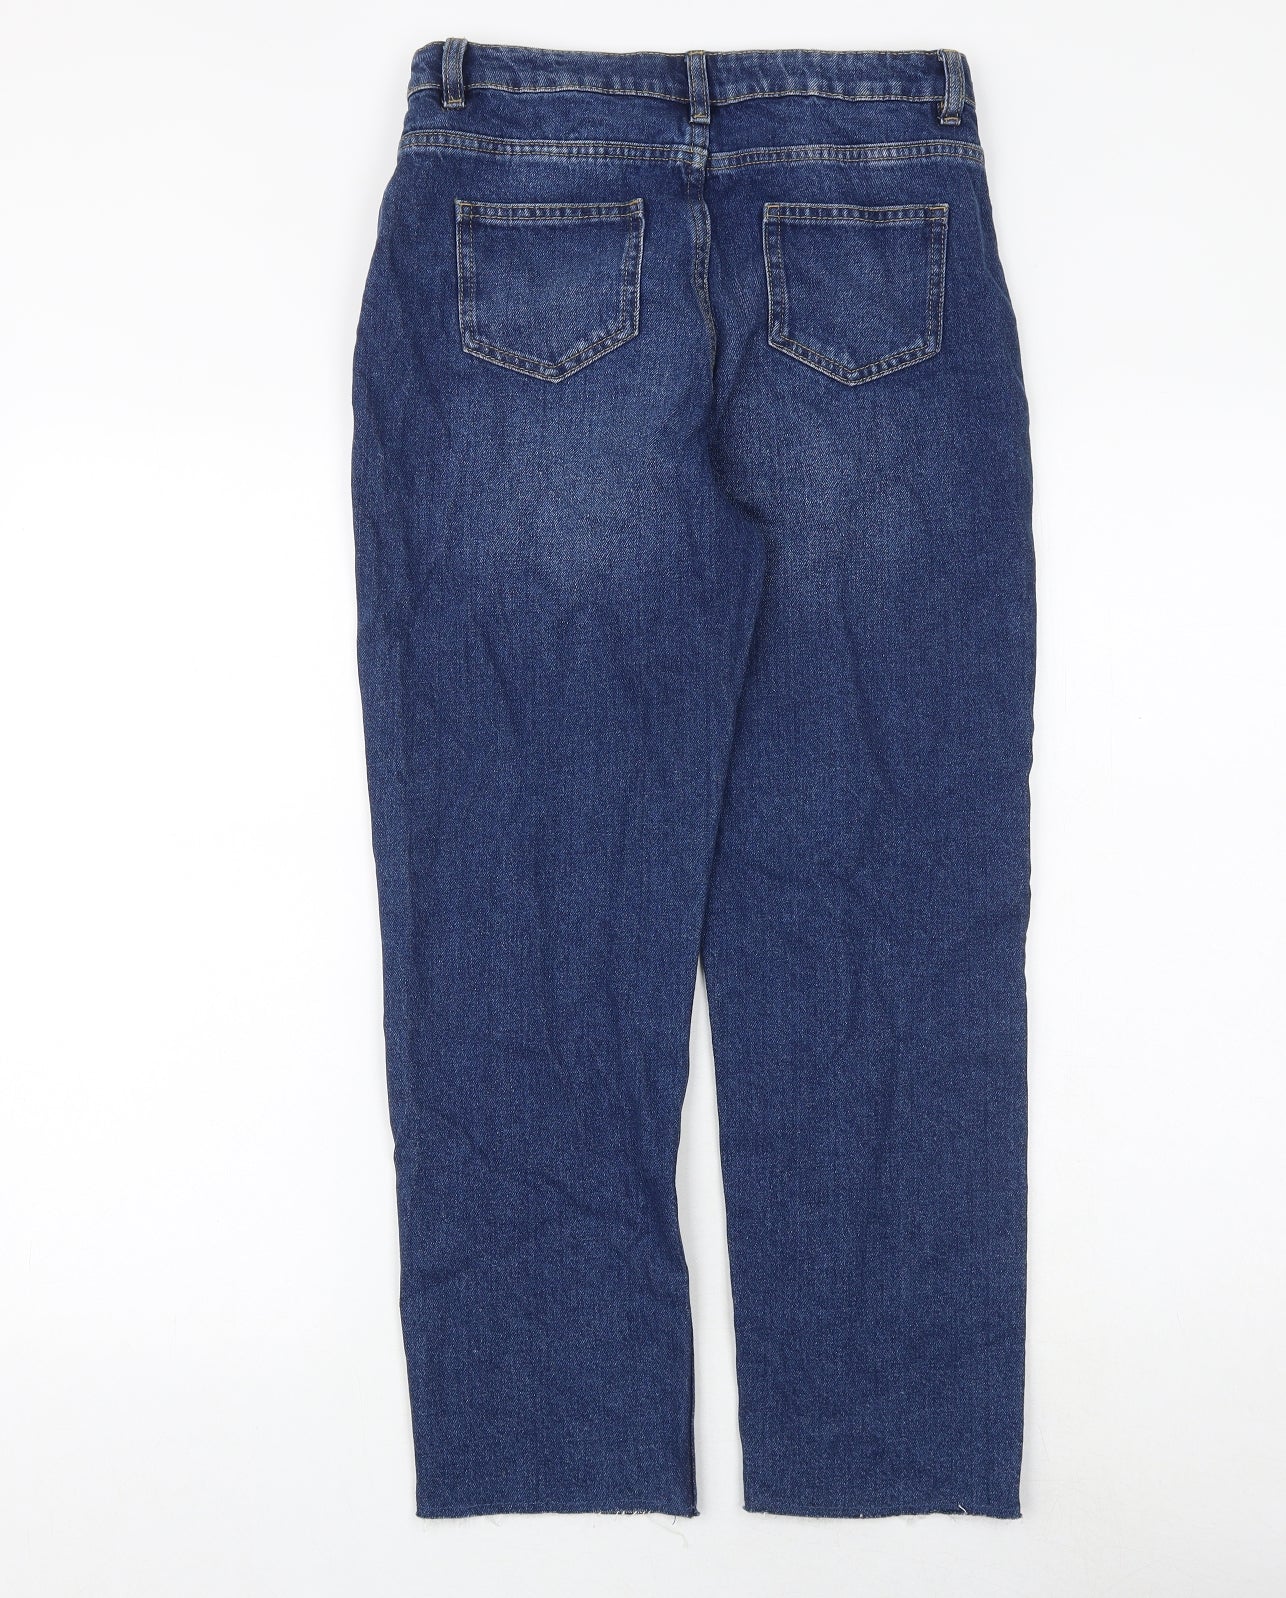 Marks and Spencer Girls Blue 100% Cotton Straight Jeans Size 13-14 Years Regular Zip